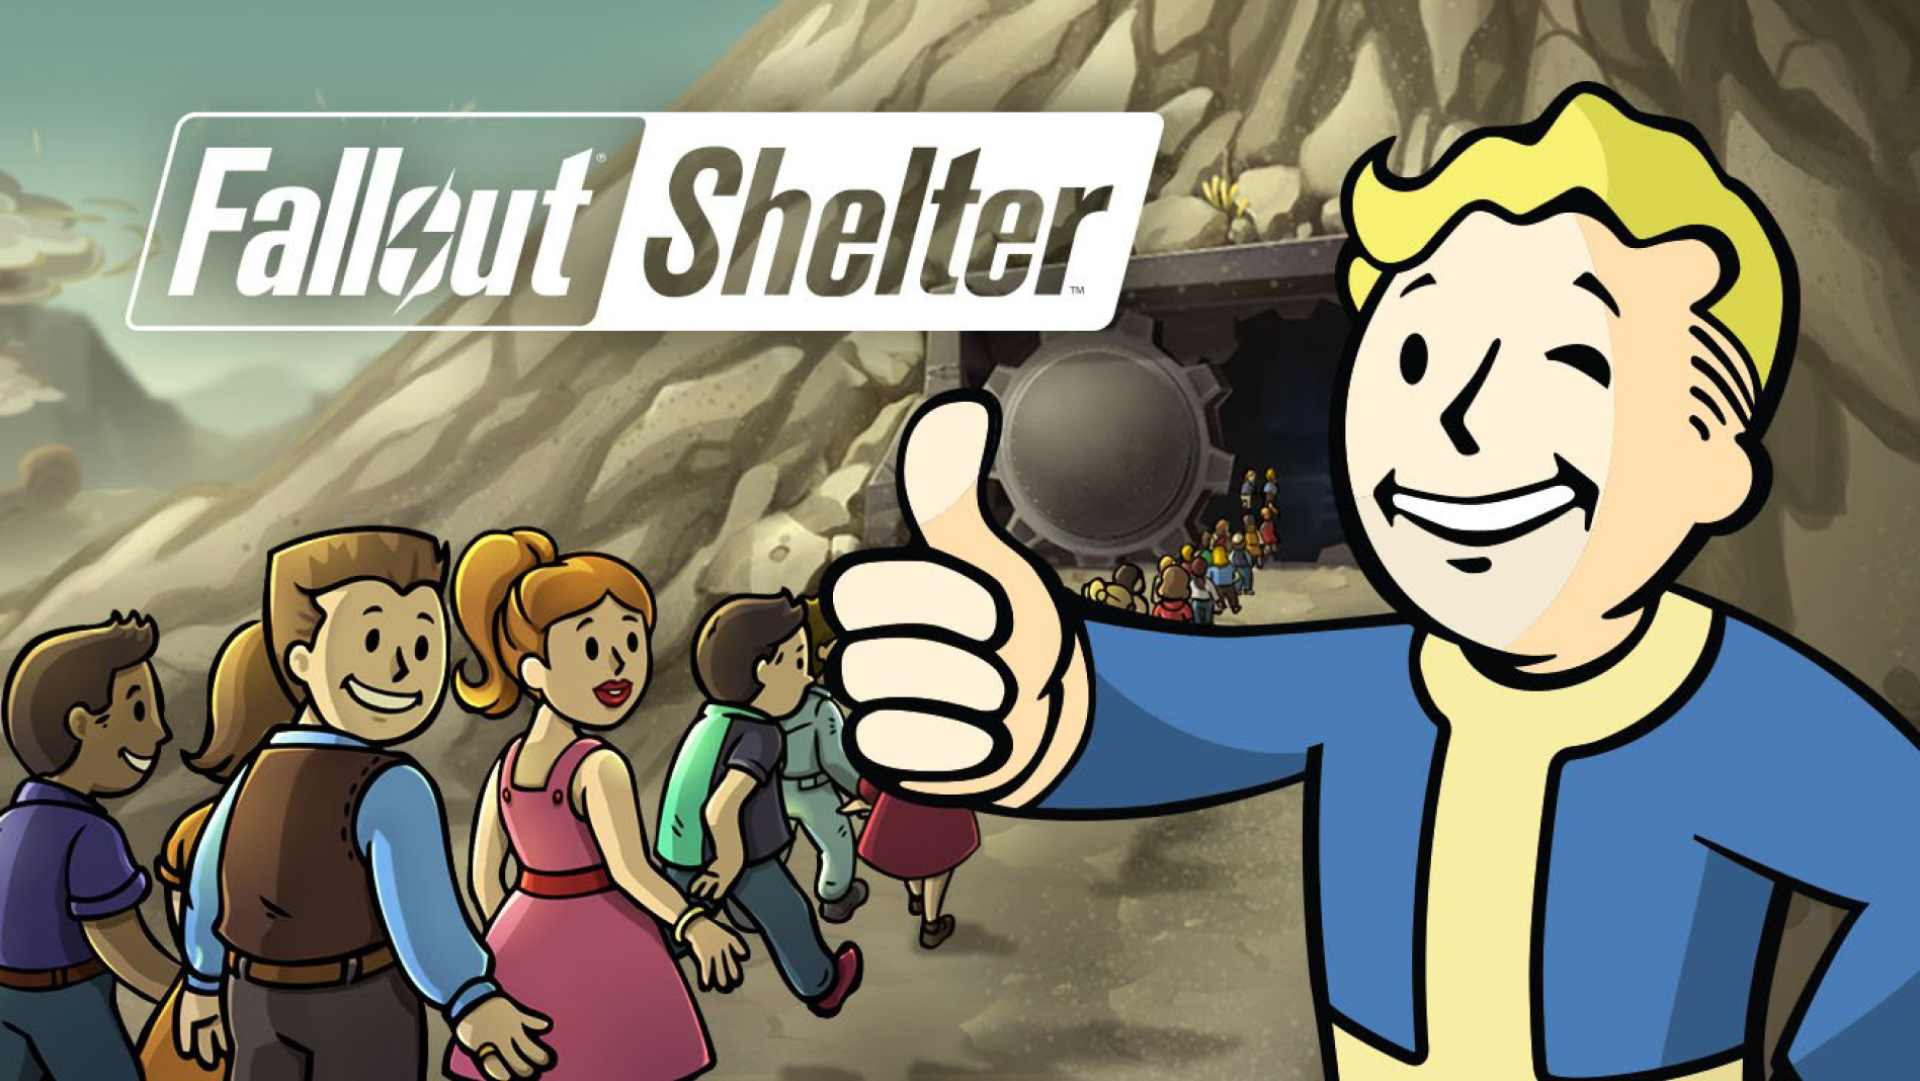 Fallout Shelter Downloads Are up by Nearly 350 Percent